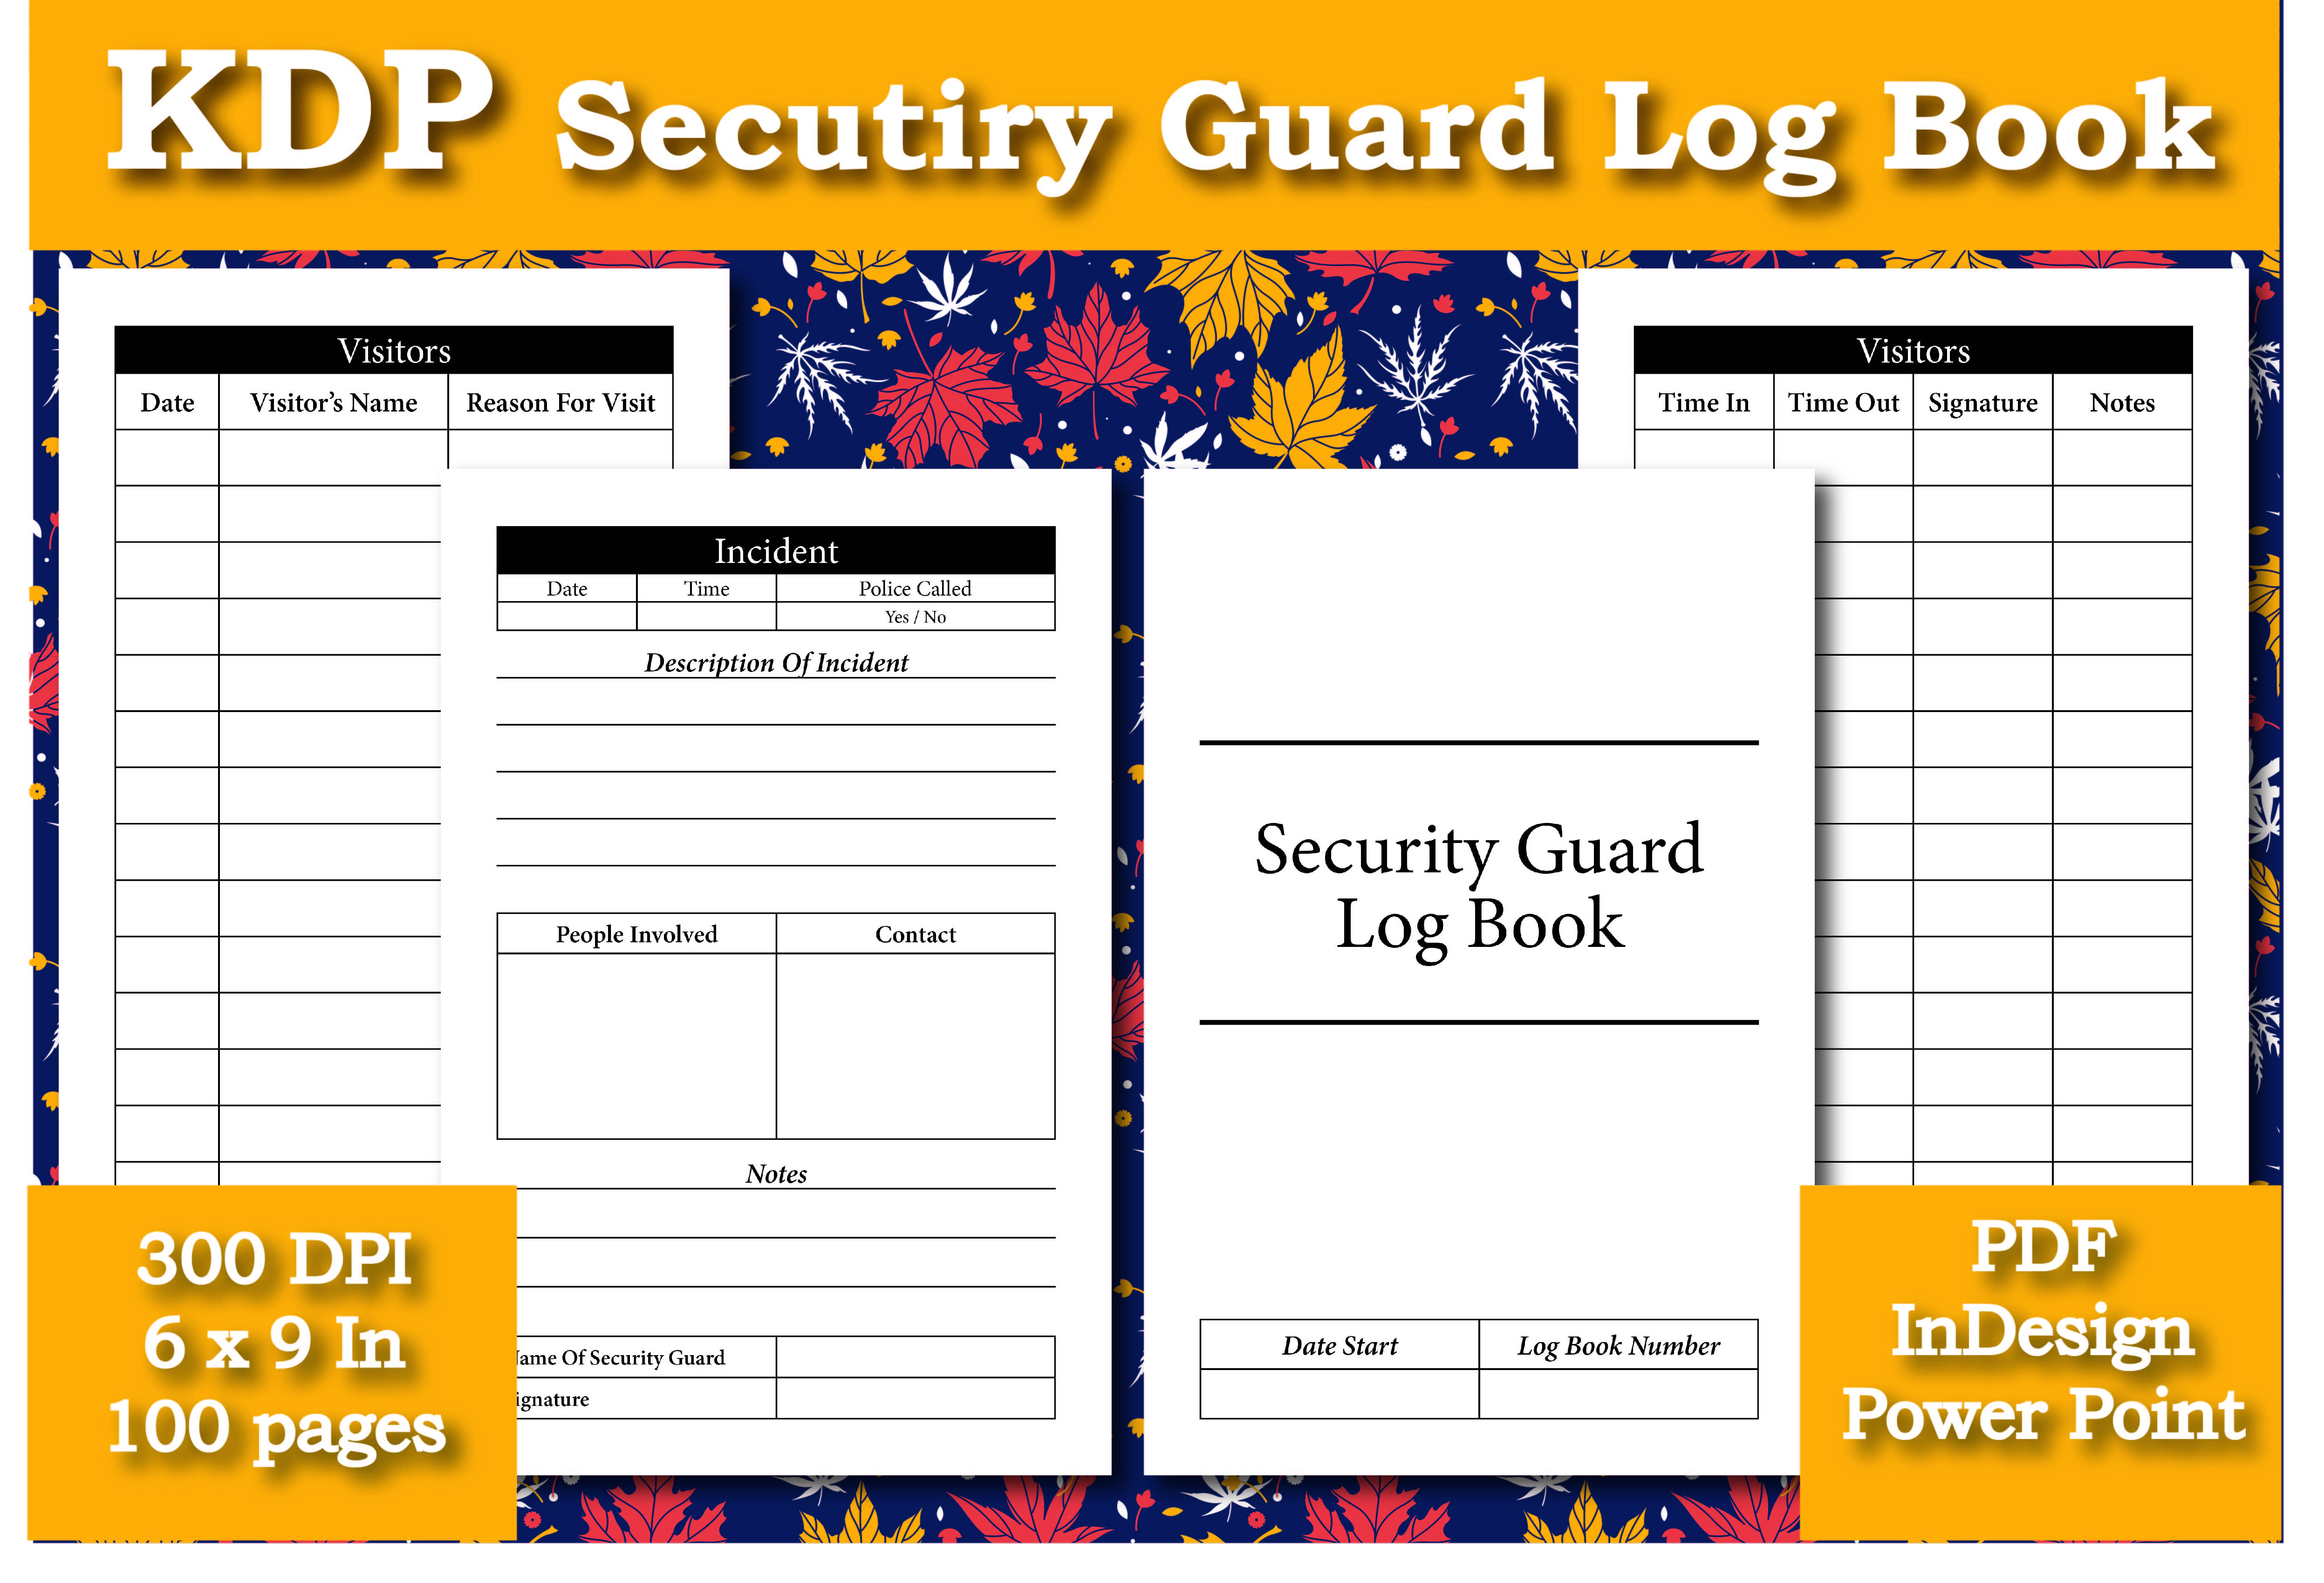 KDP Security Guard Log Book Interior Graphic by Ivana Prue · Creative